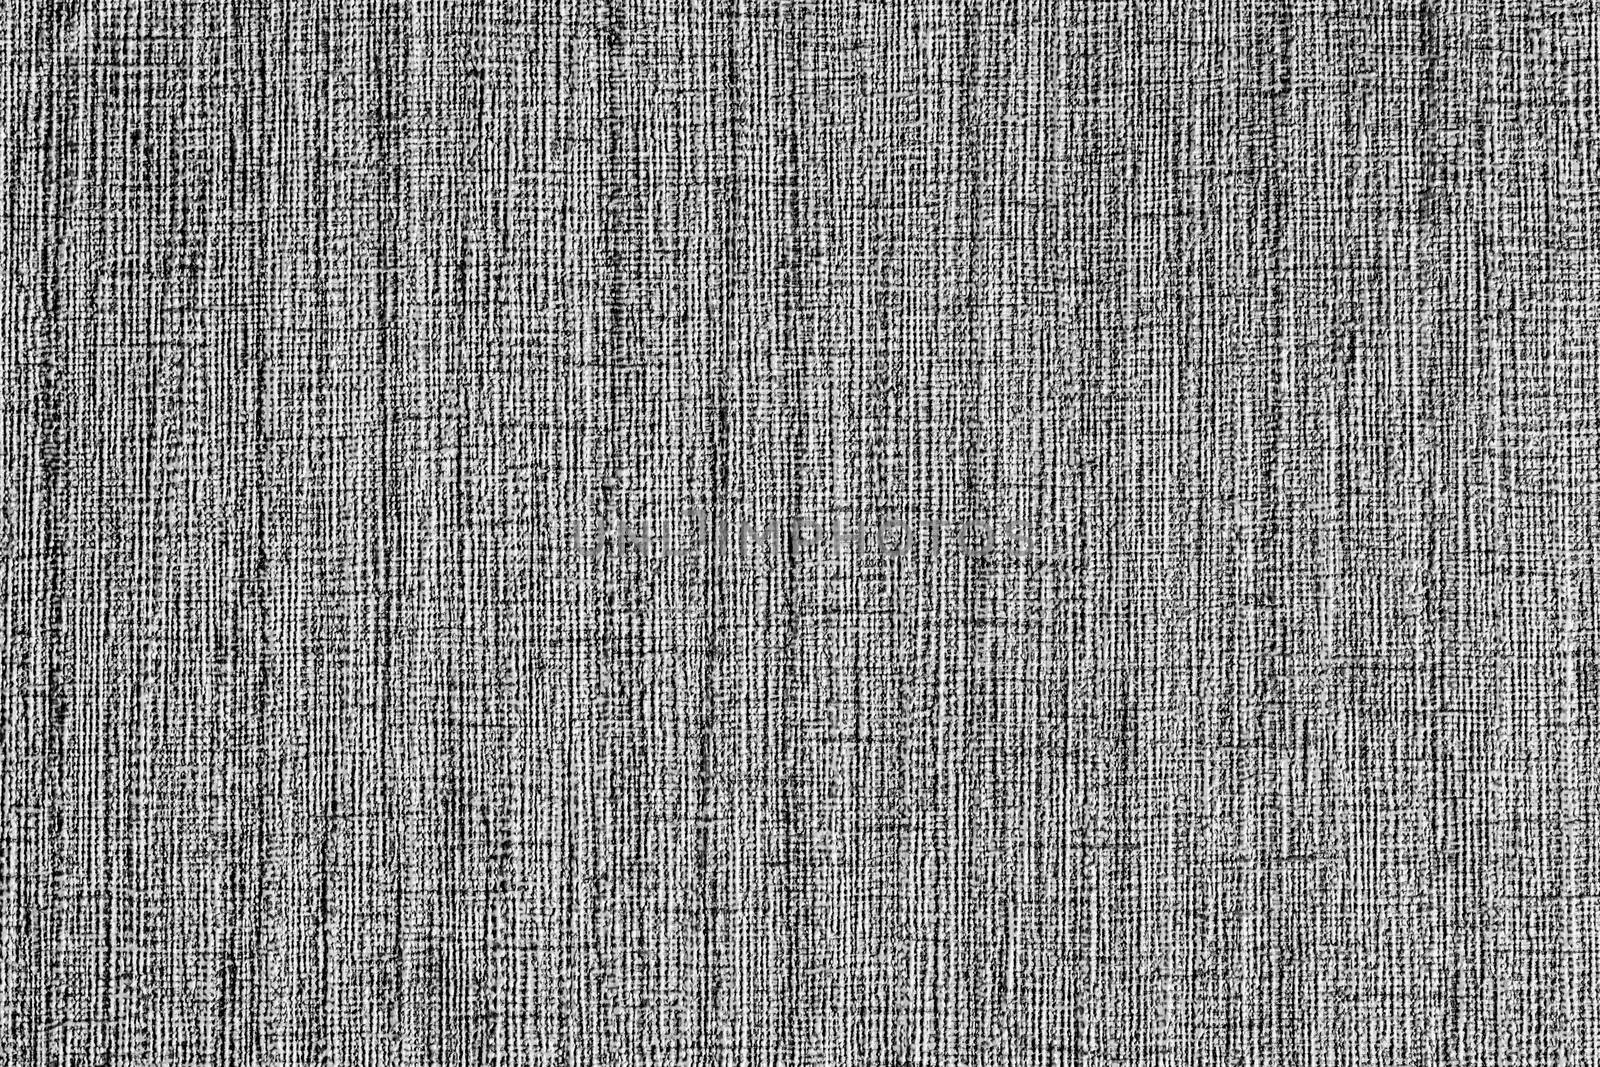 Gray wallpaper texture. Abstract background for design with copy space for a text.